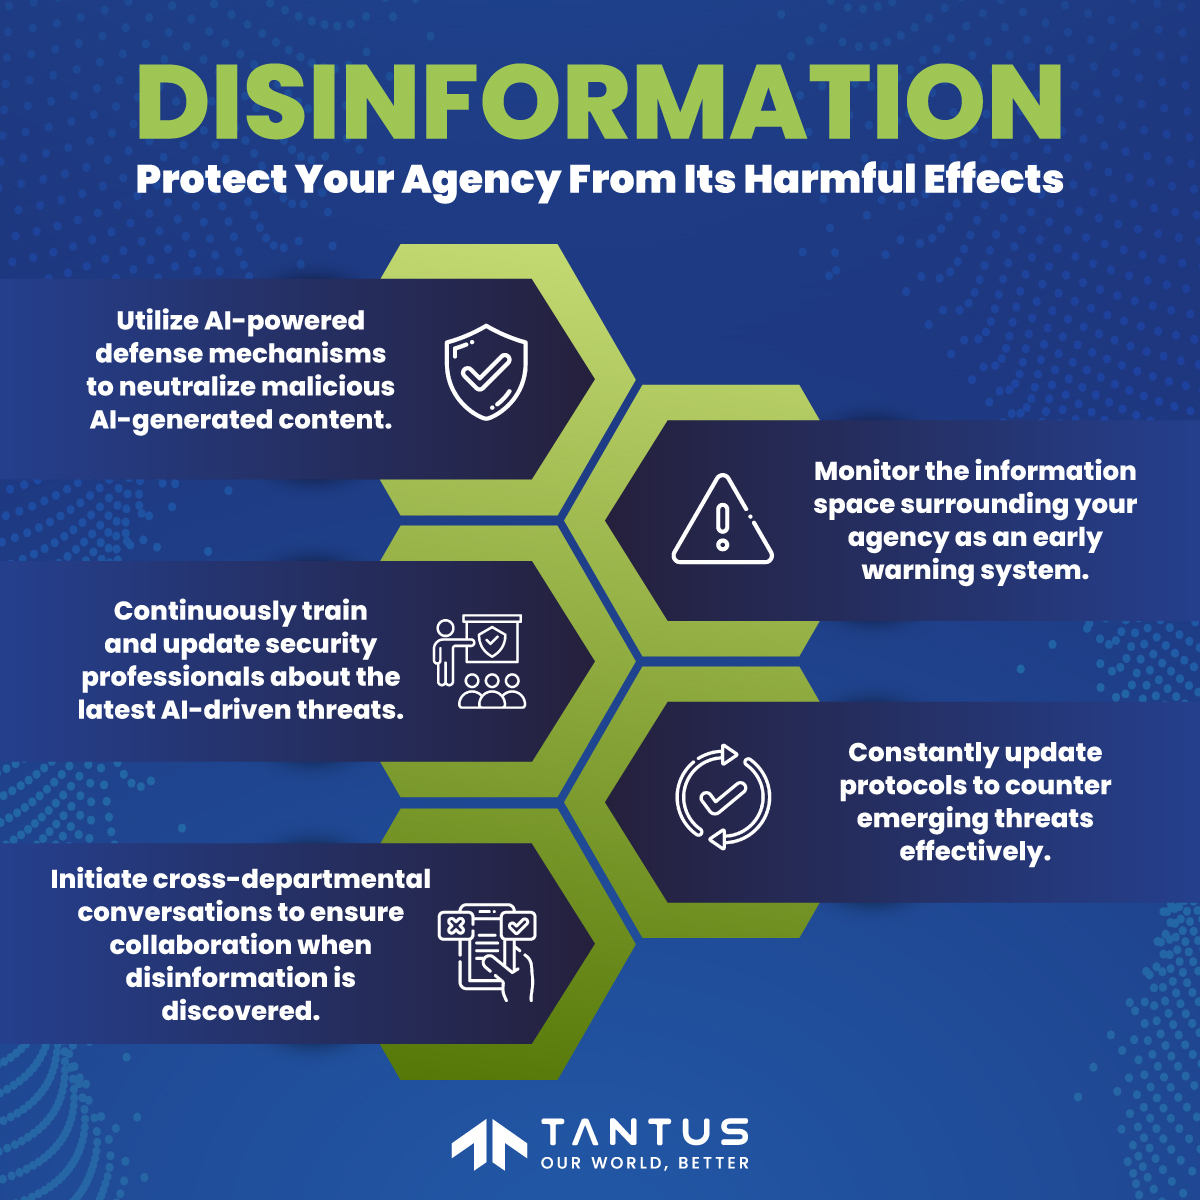 It's an election year. Is your agency prepared for the threat of #Disinformation in the age of #AI? 

The #FederalGovernment should take preventative steps to prepare employees and systems for any potential disinformation threats — Tantus Tech can help. 

#GovCon